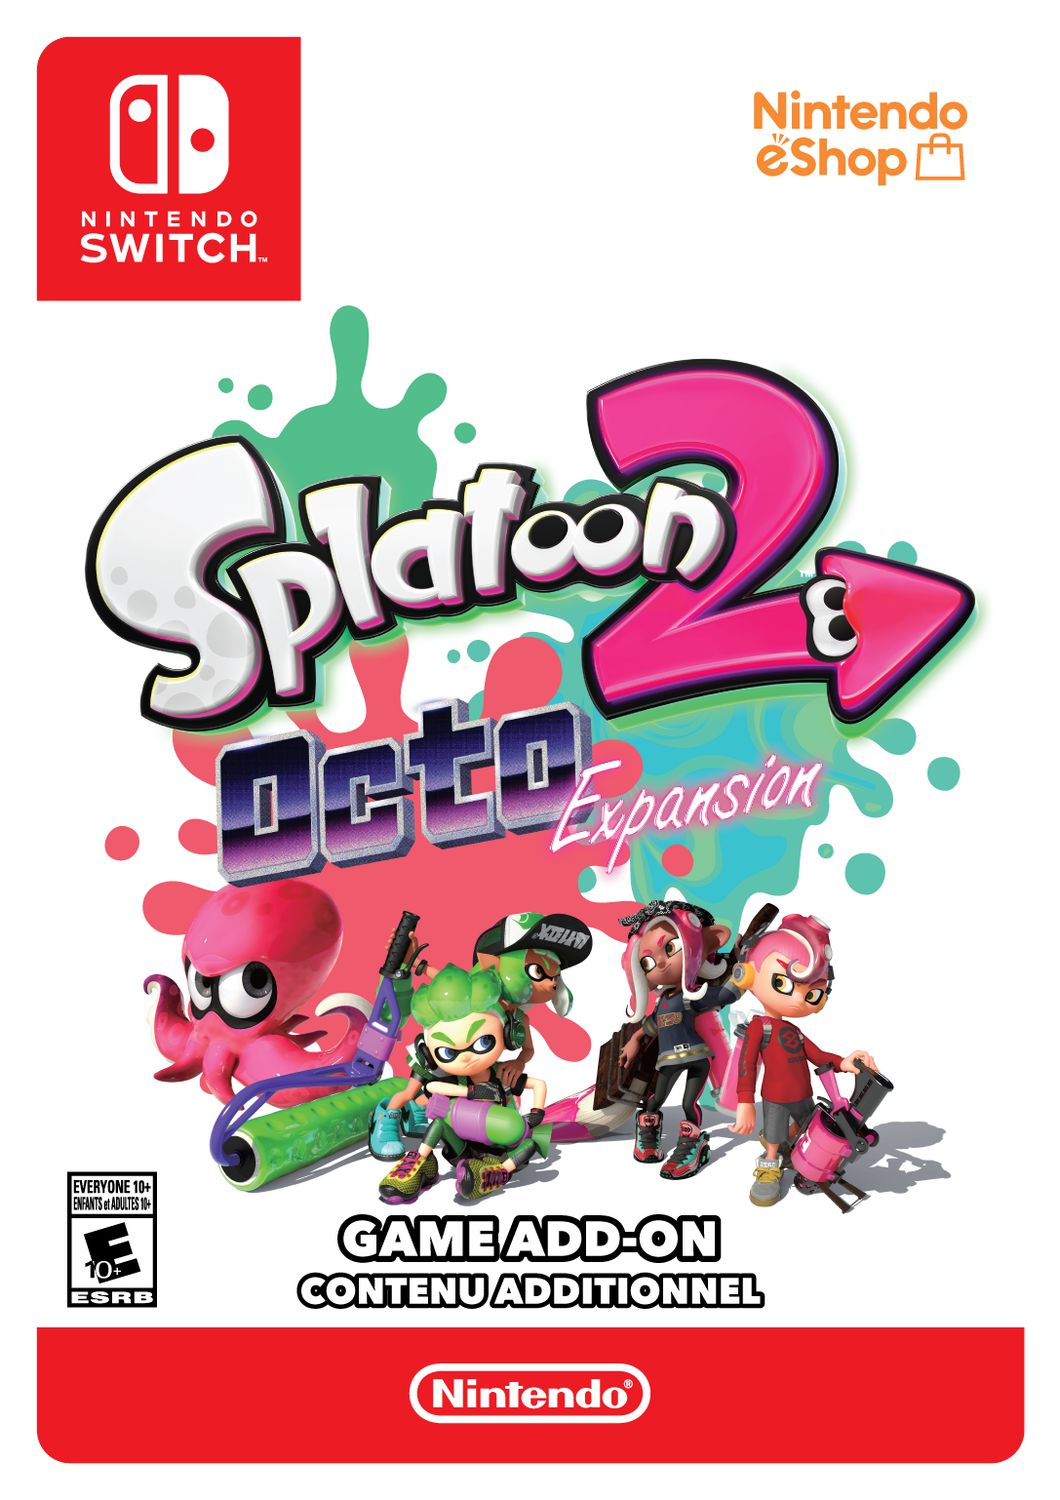 octo expansion price